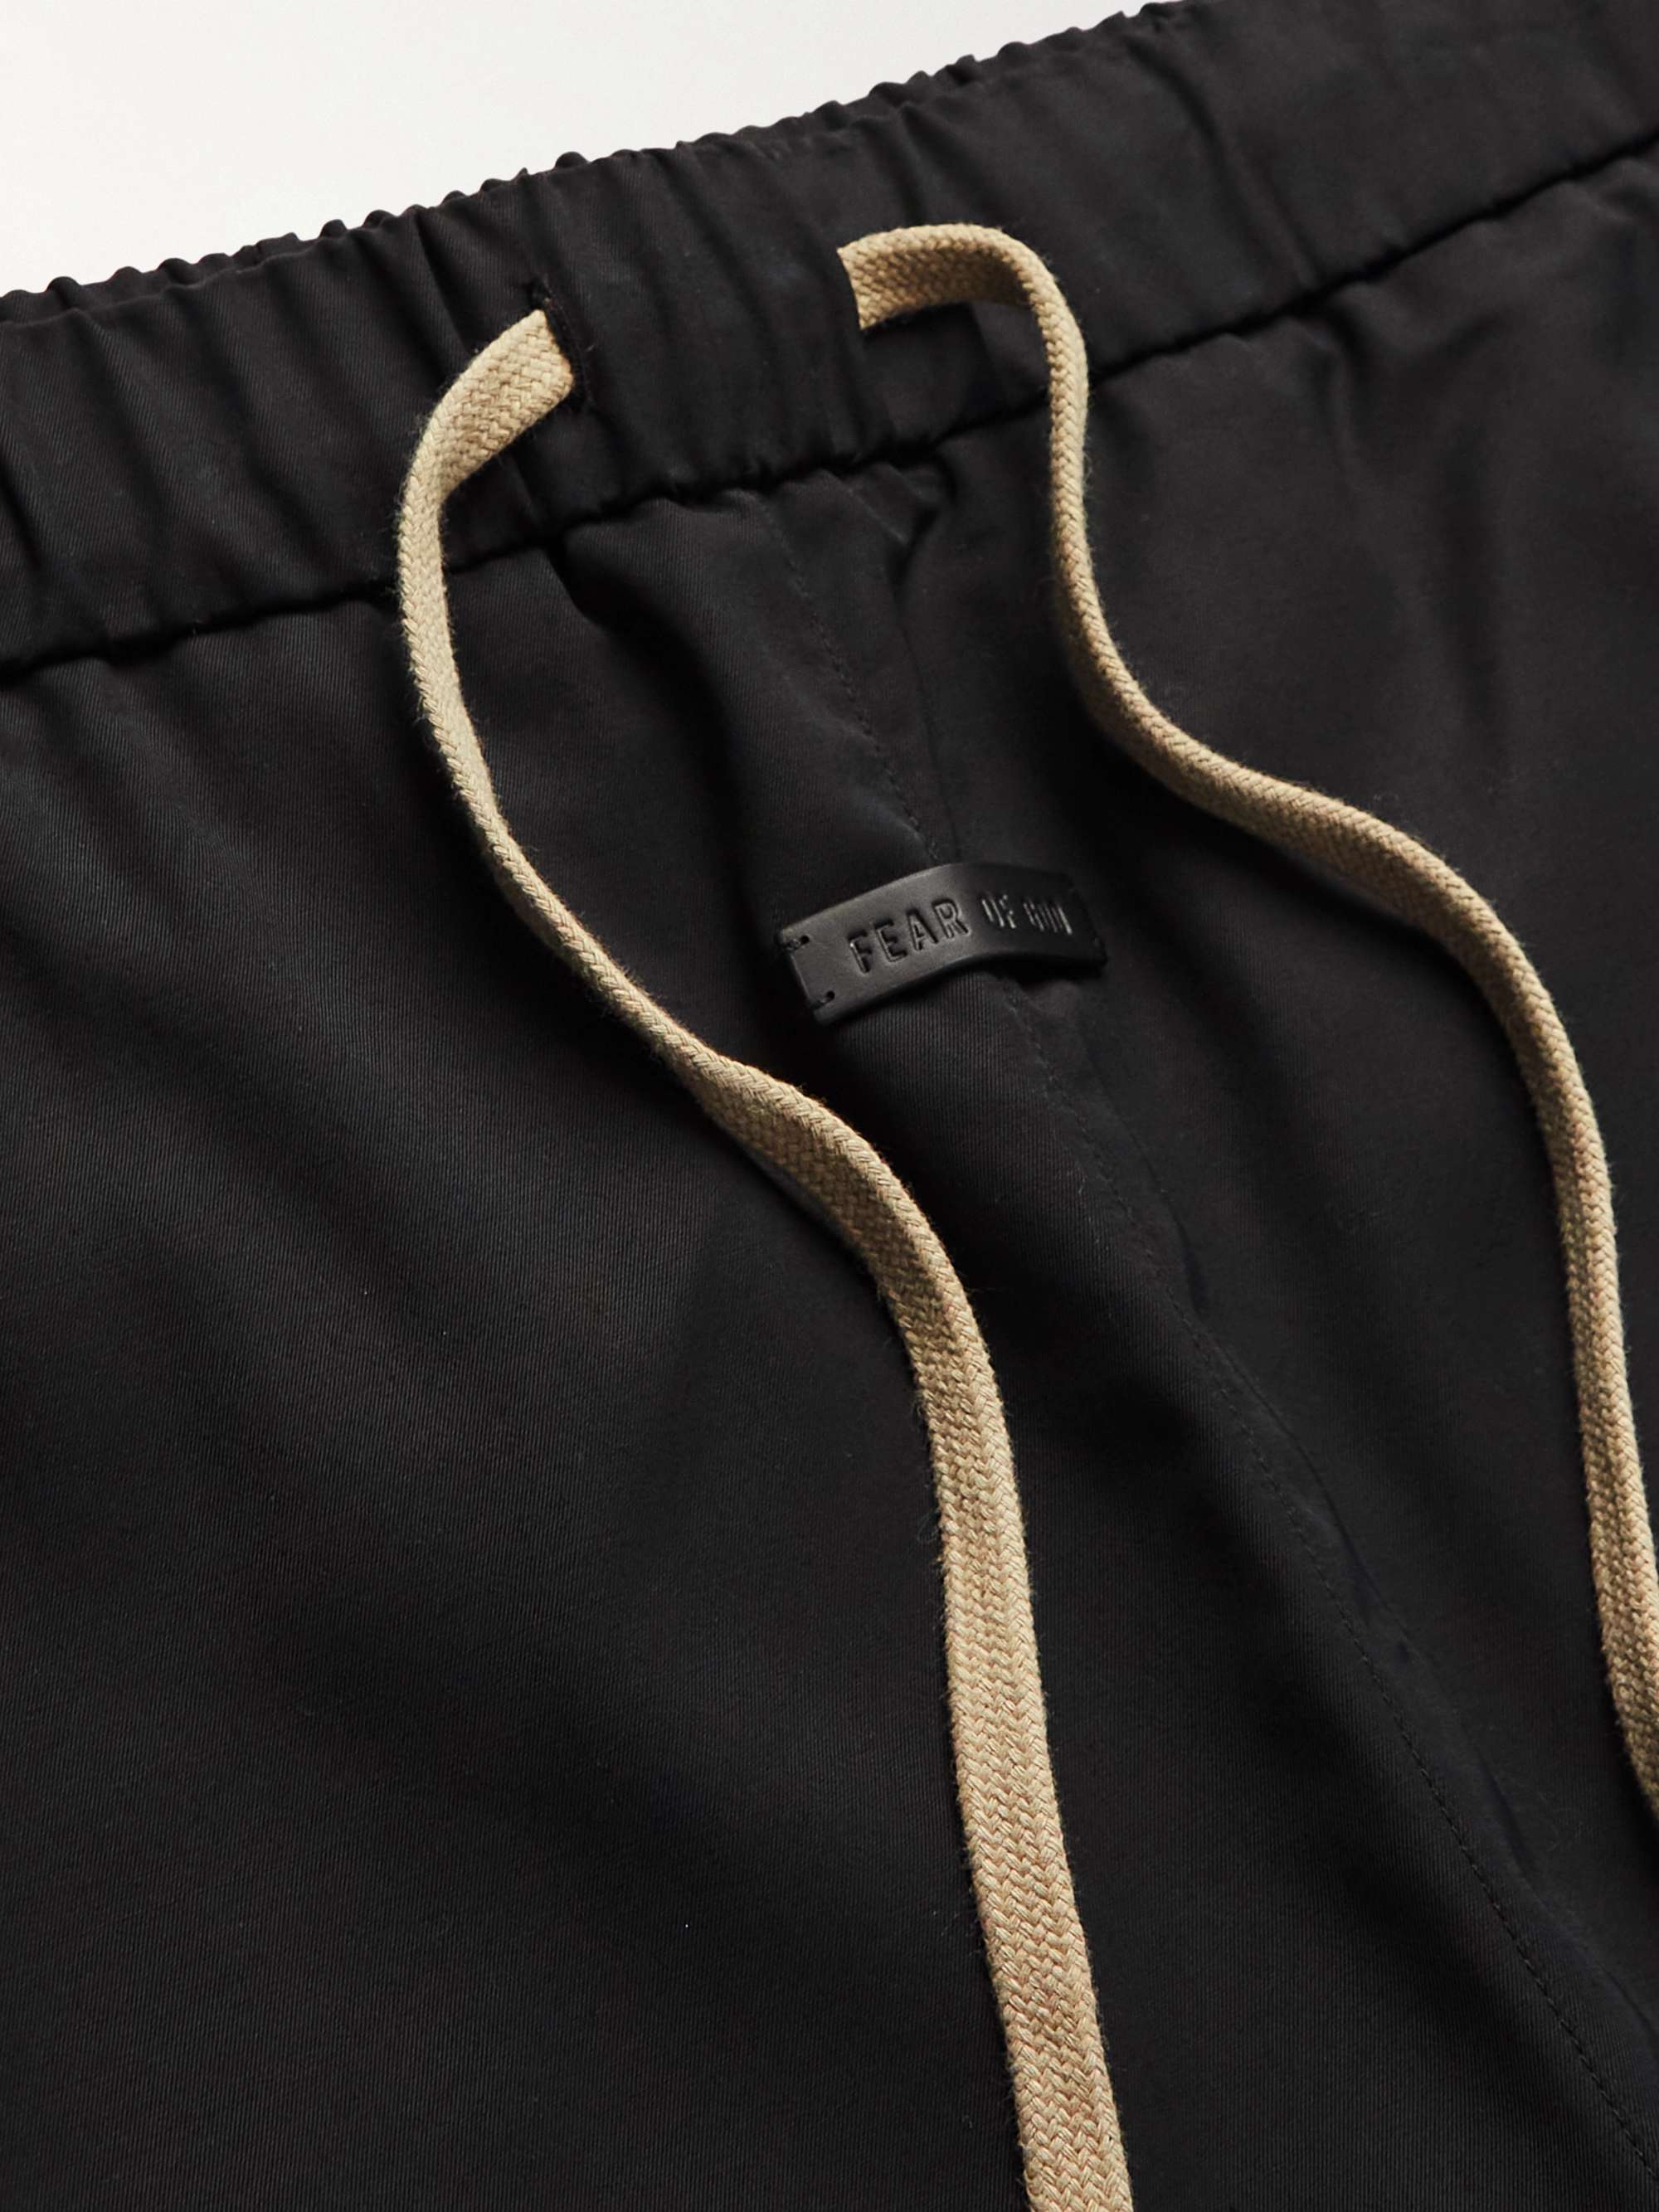 FEAR OF GOD Eternal Tapered Twill Drawstring Trousers